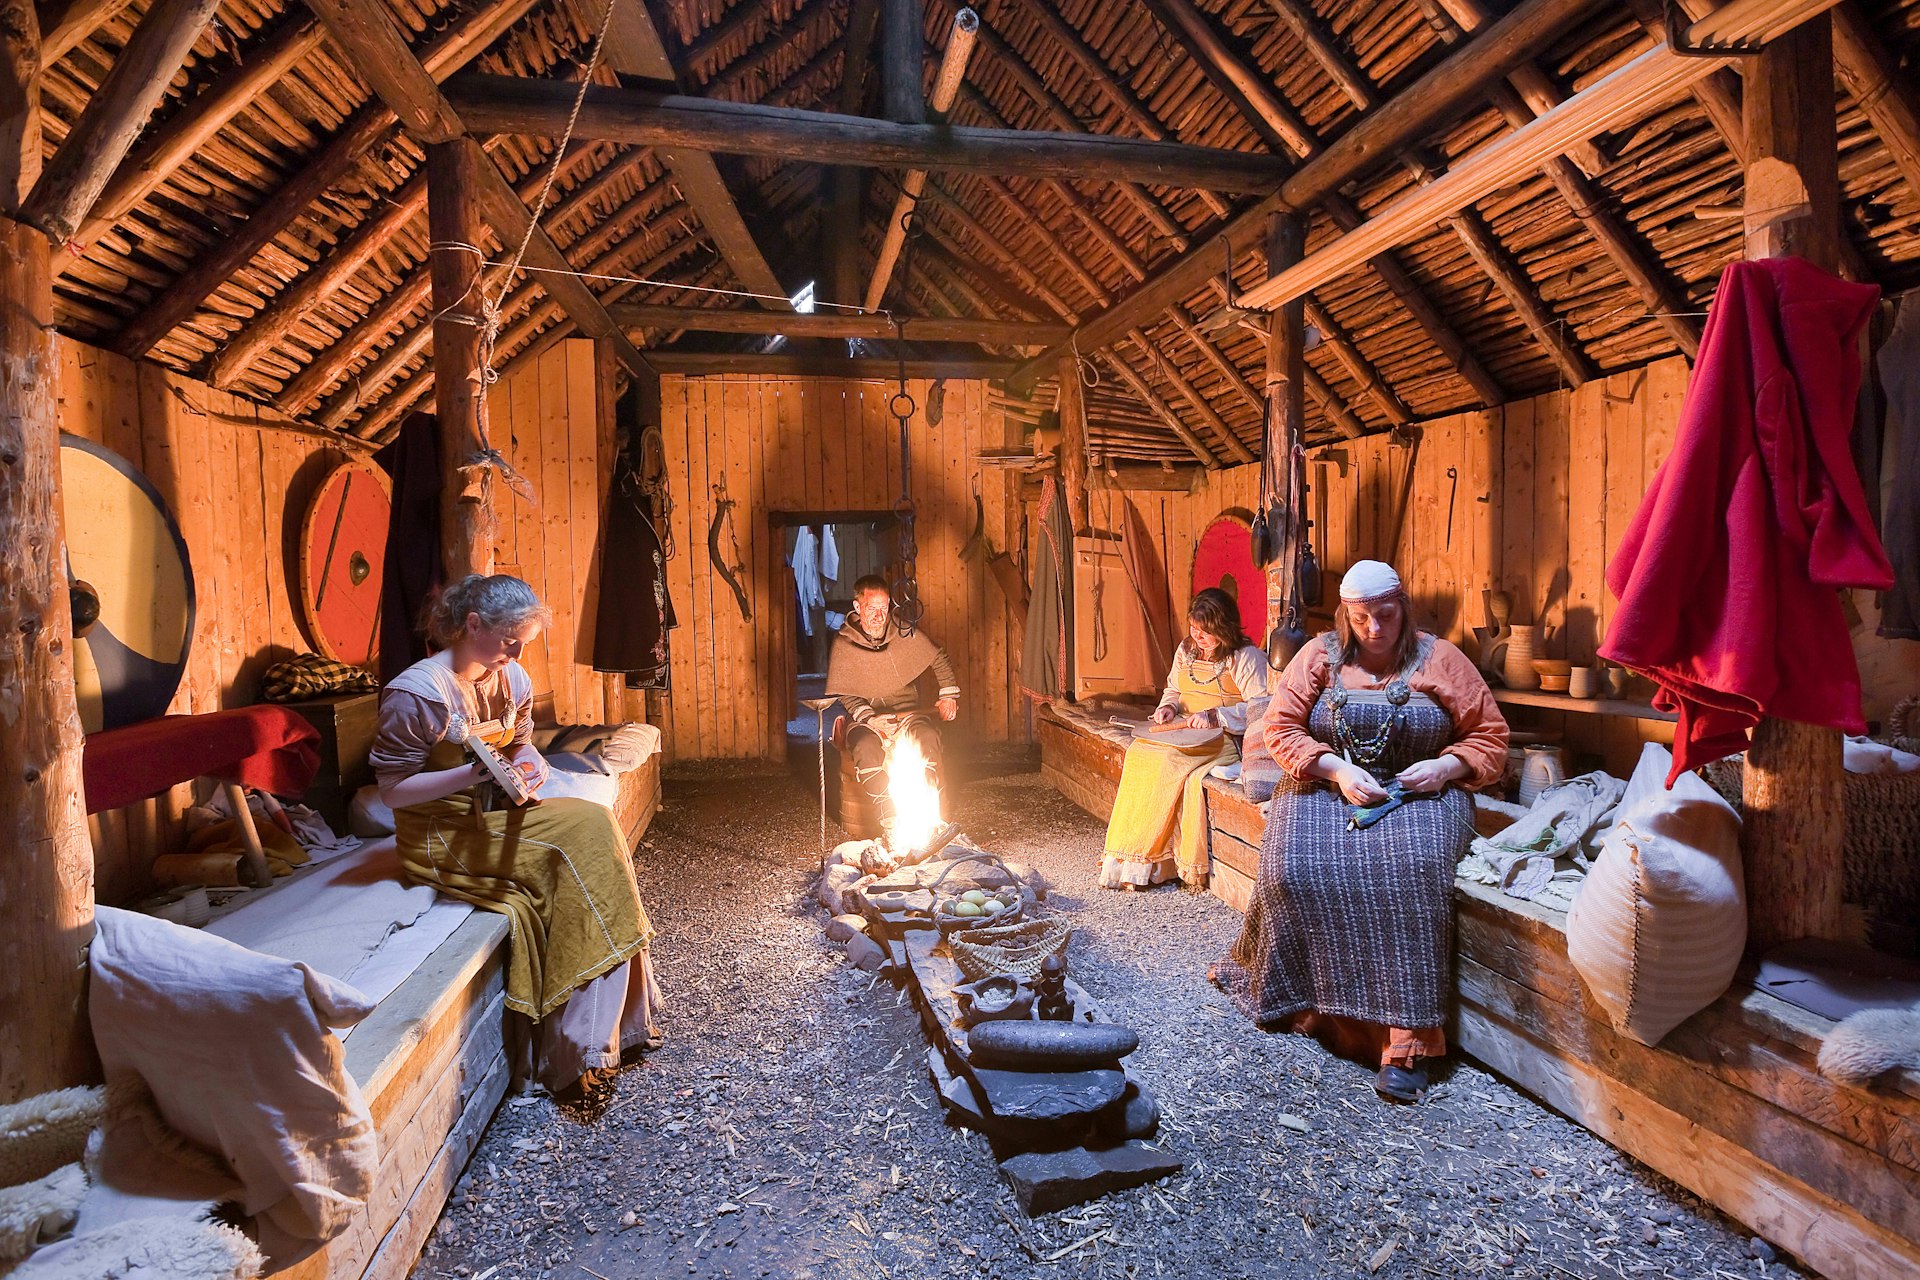 Parks Canada interpreters in period costumes performing traditional tasks inside a recreated Viking longhouse at L’Anse aux Meadows National Historic Site, Newfoundland, Canada